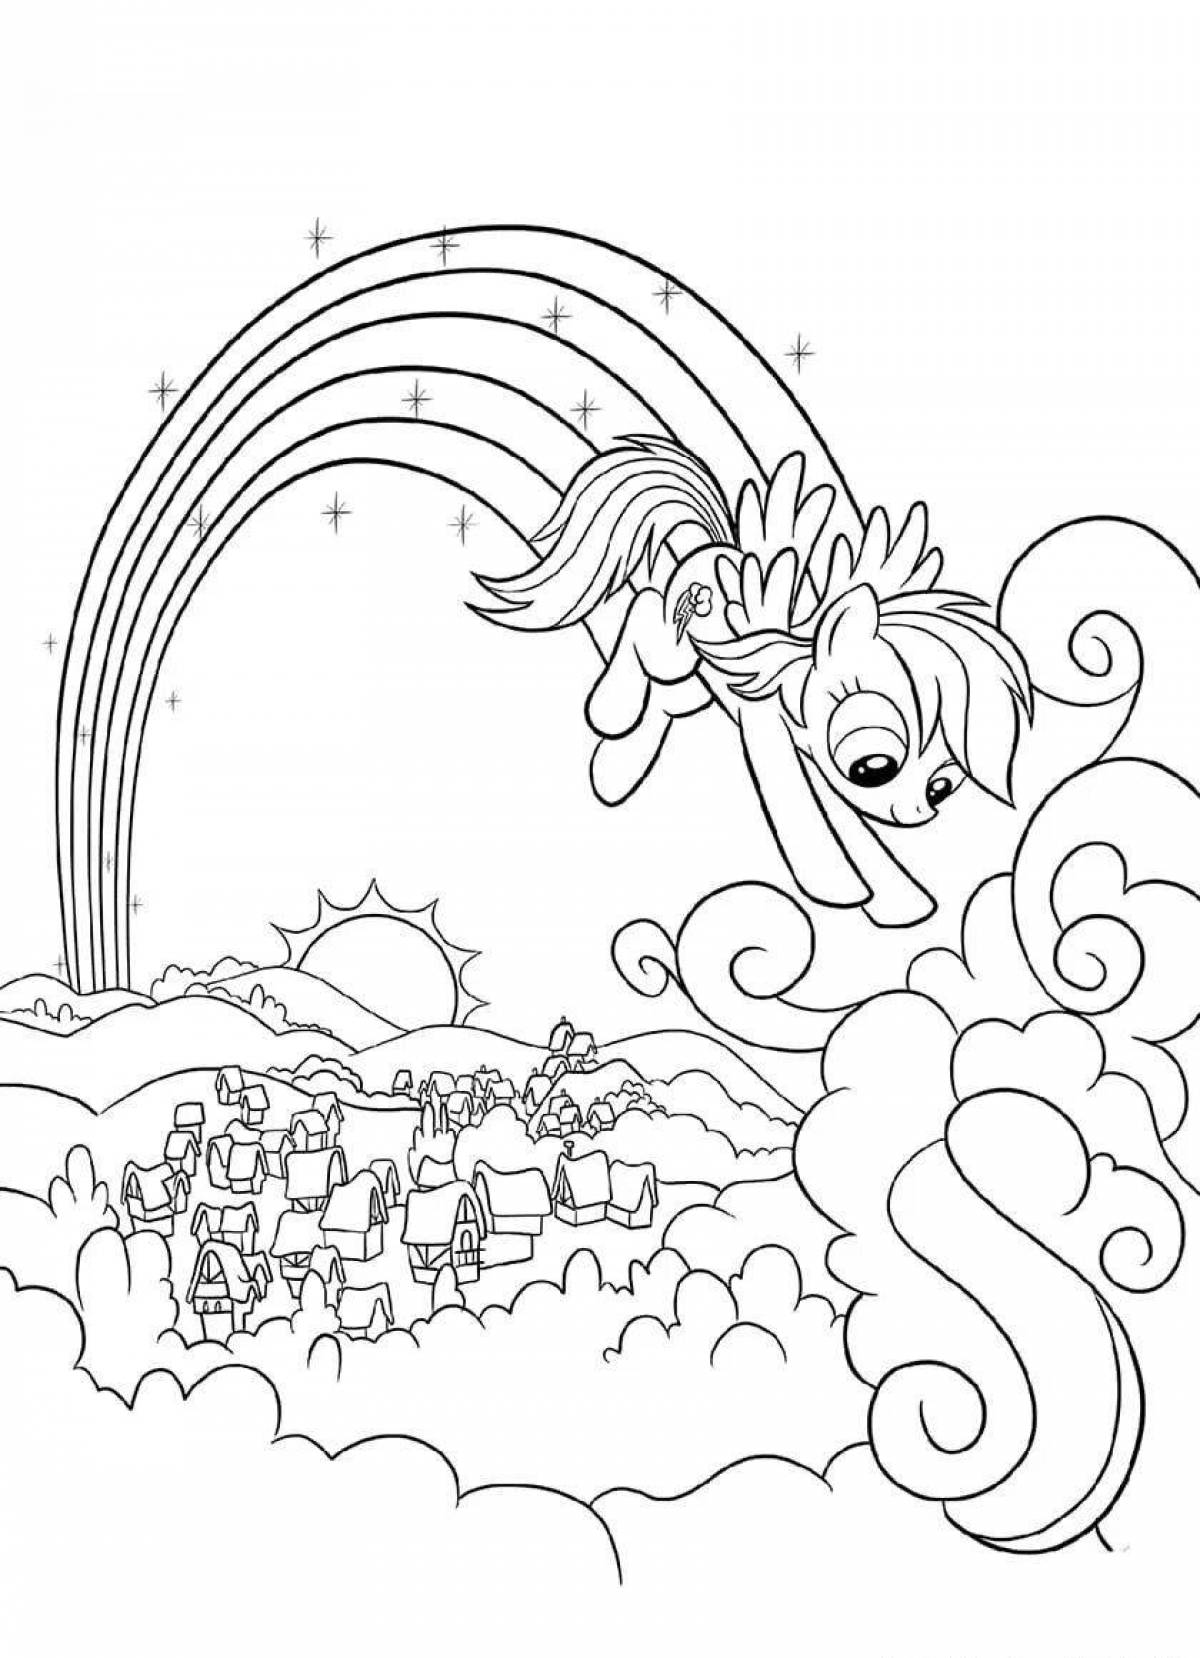 Glowing rainbow pony coloring page